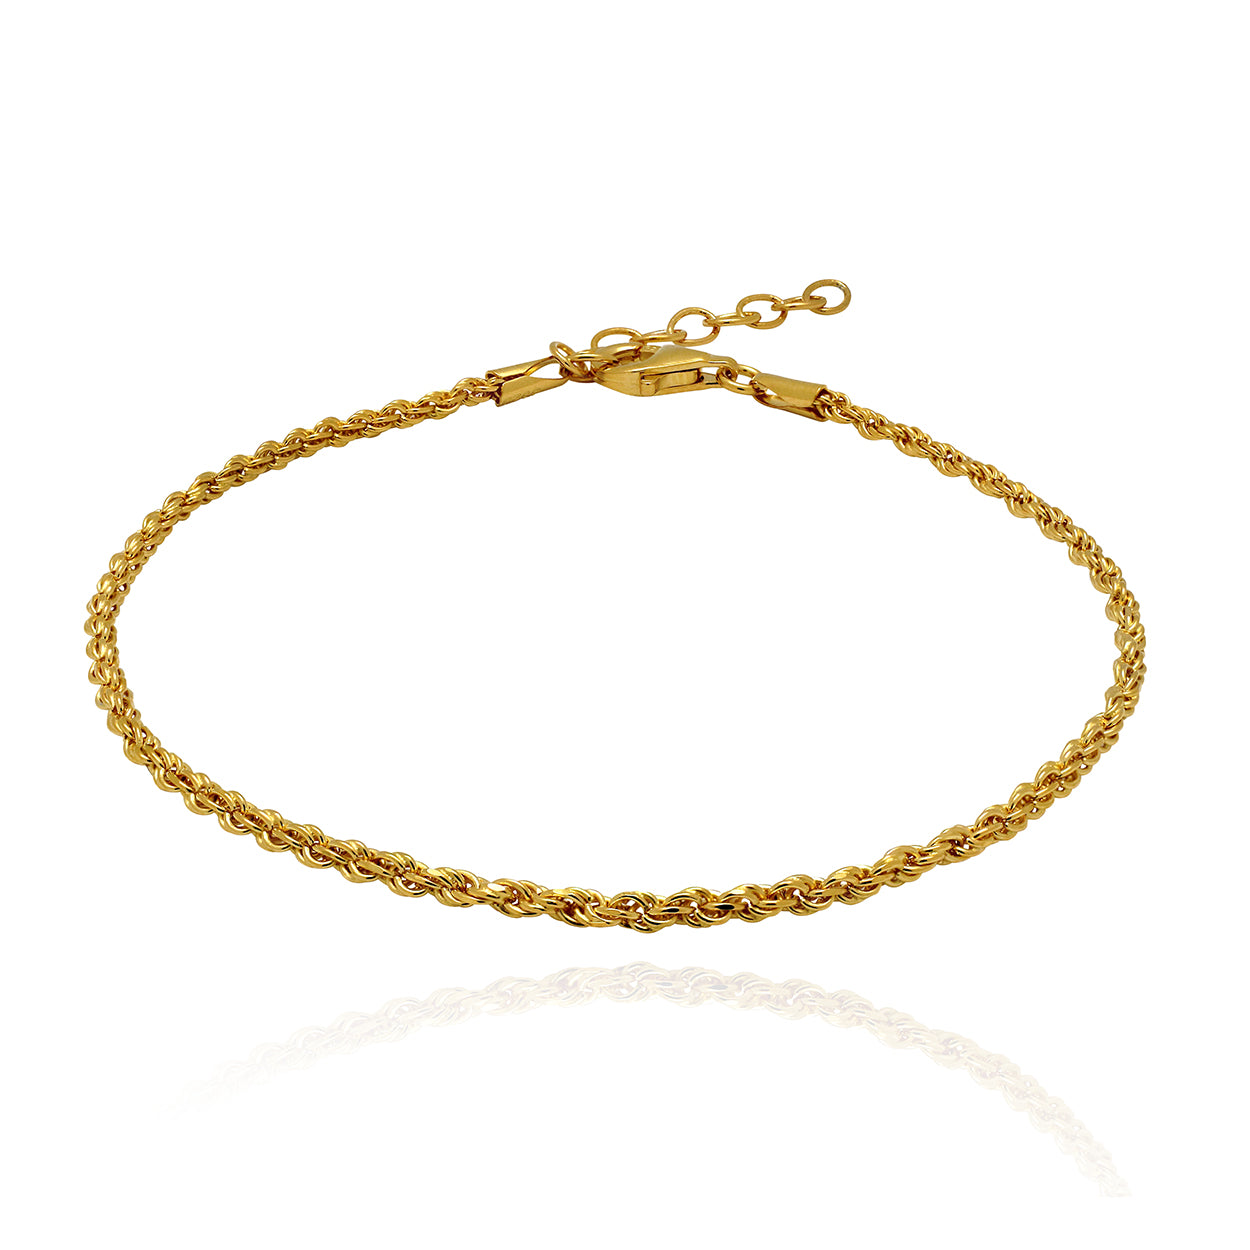 Sterling Silver Rope Style Bracelet Plated in 18KT Yellow Gold 1